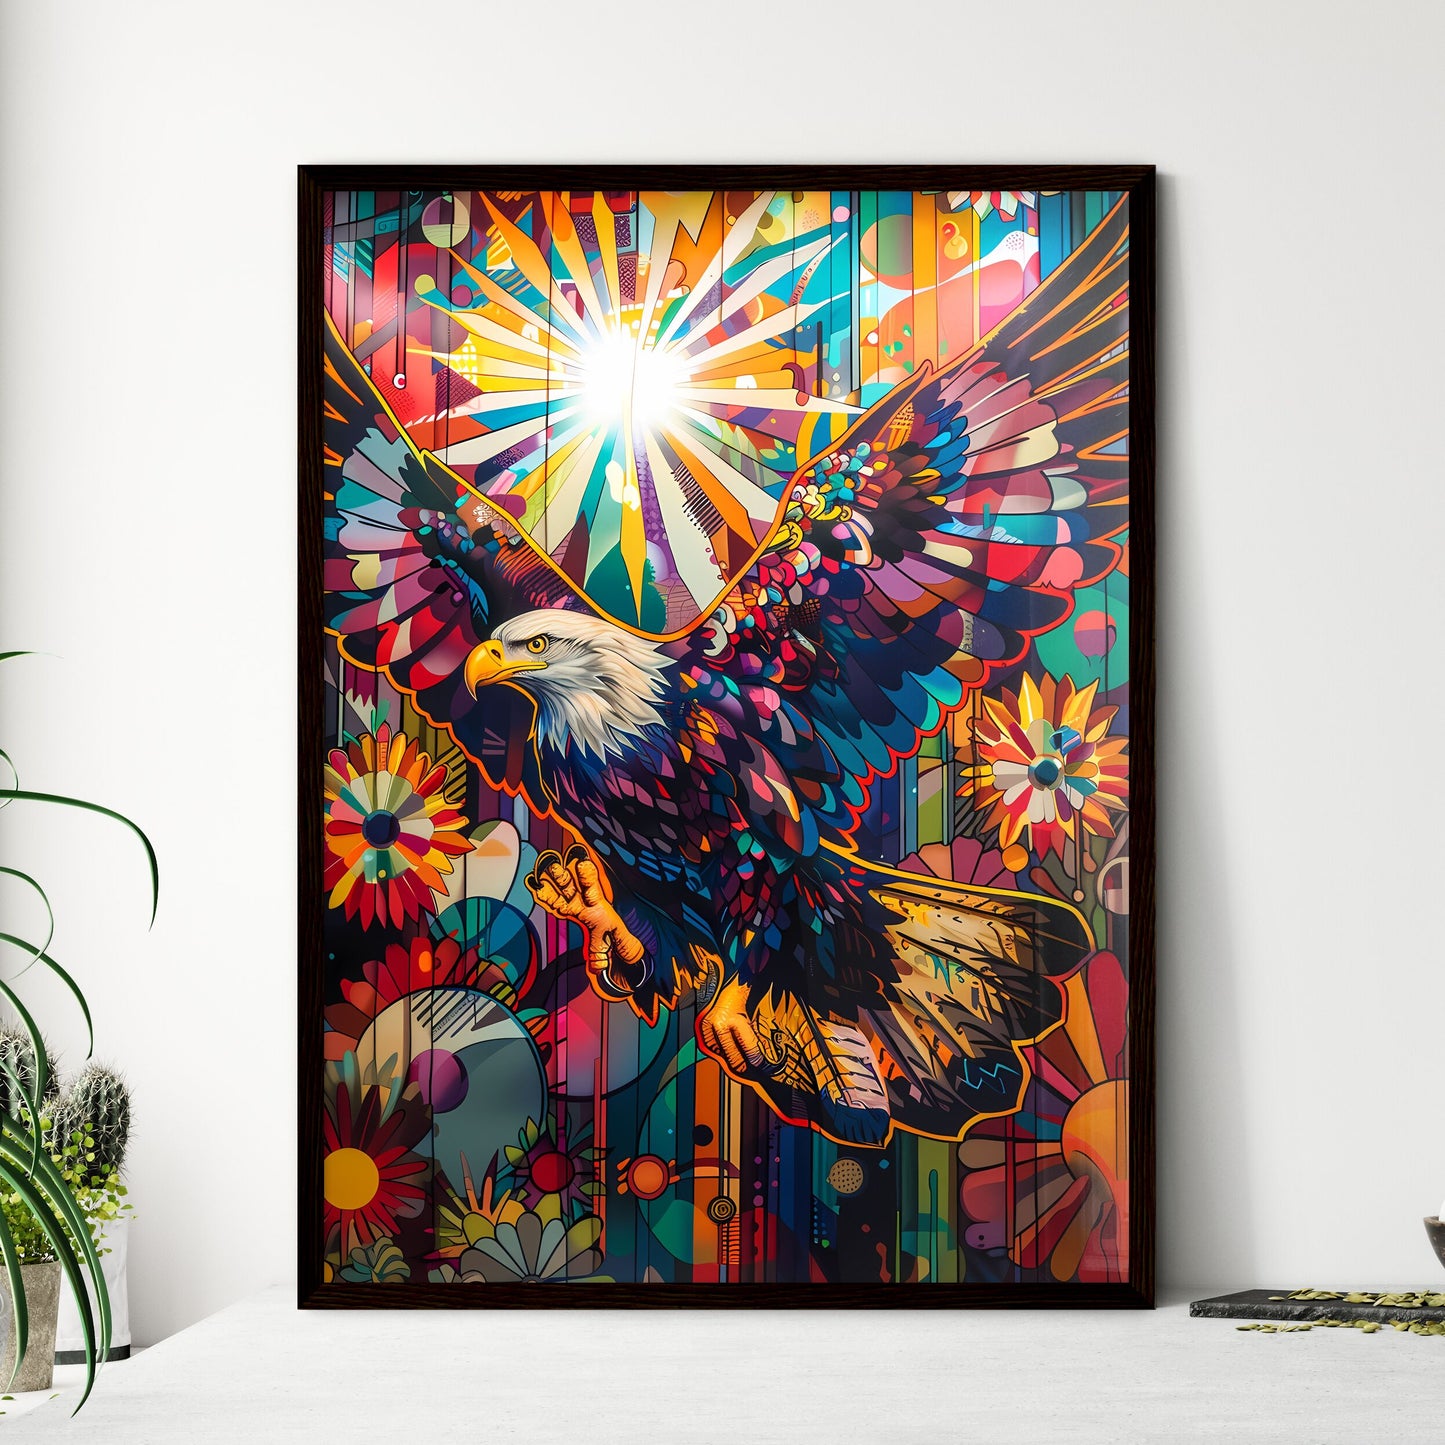 Psychedelic Eagle Painting: Vibrant Pop Art Deco Graffiti Over Stained Glass Landscape Default Title